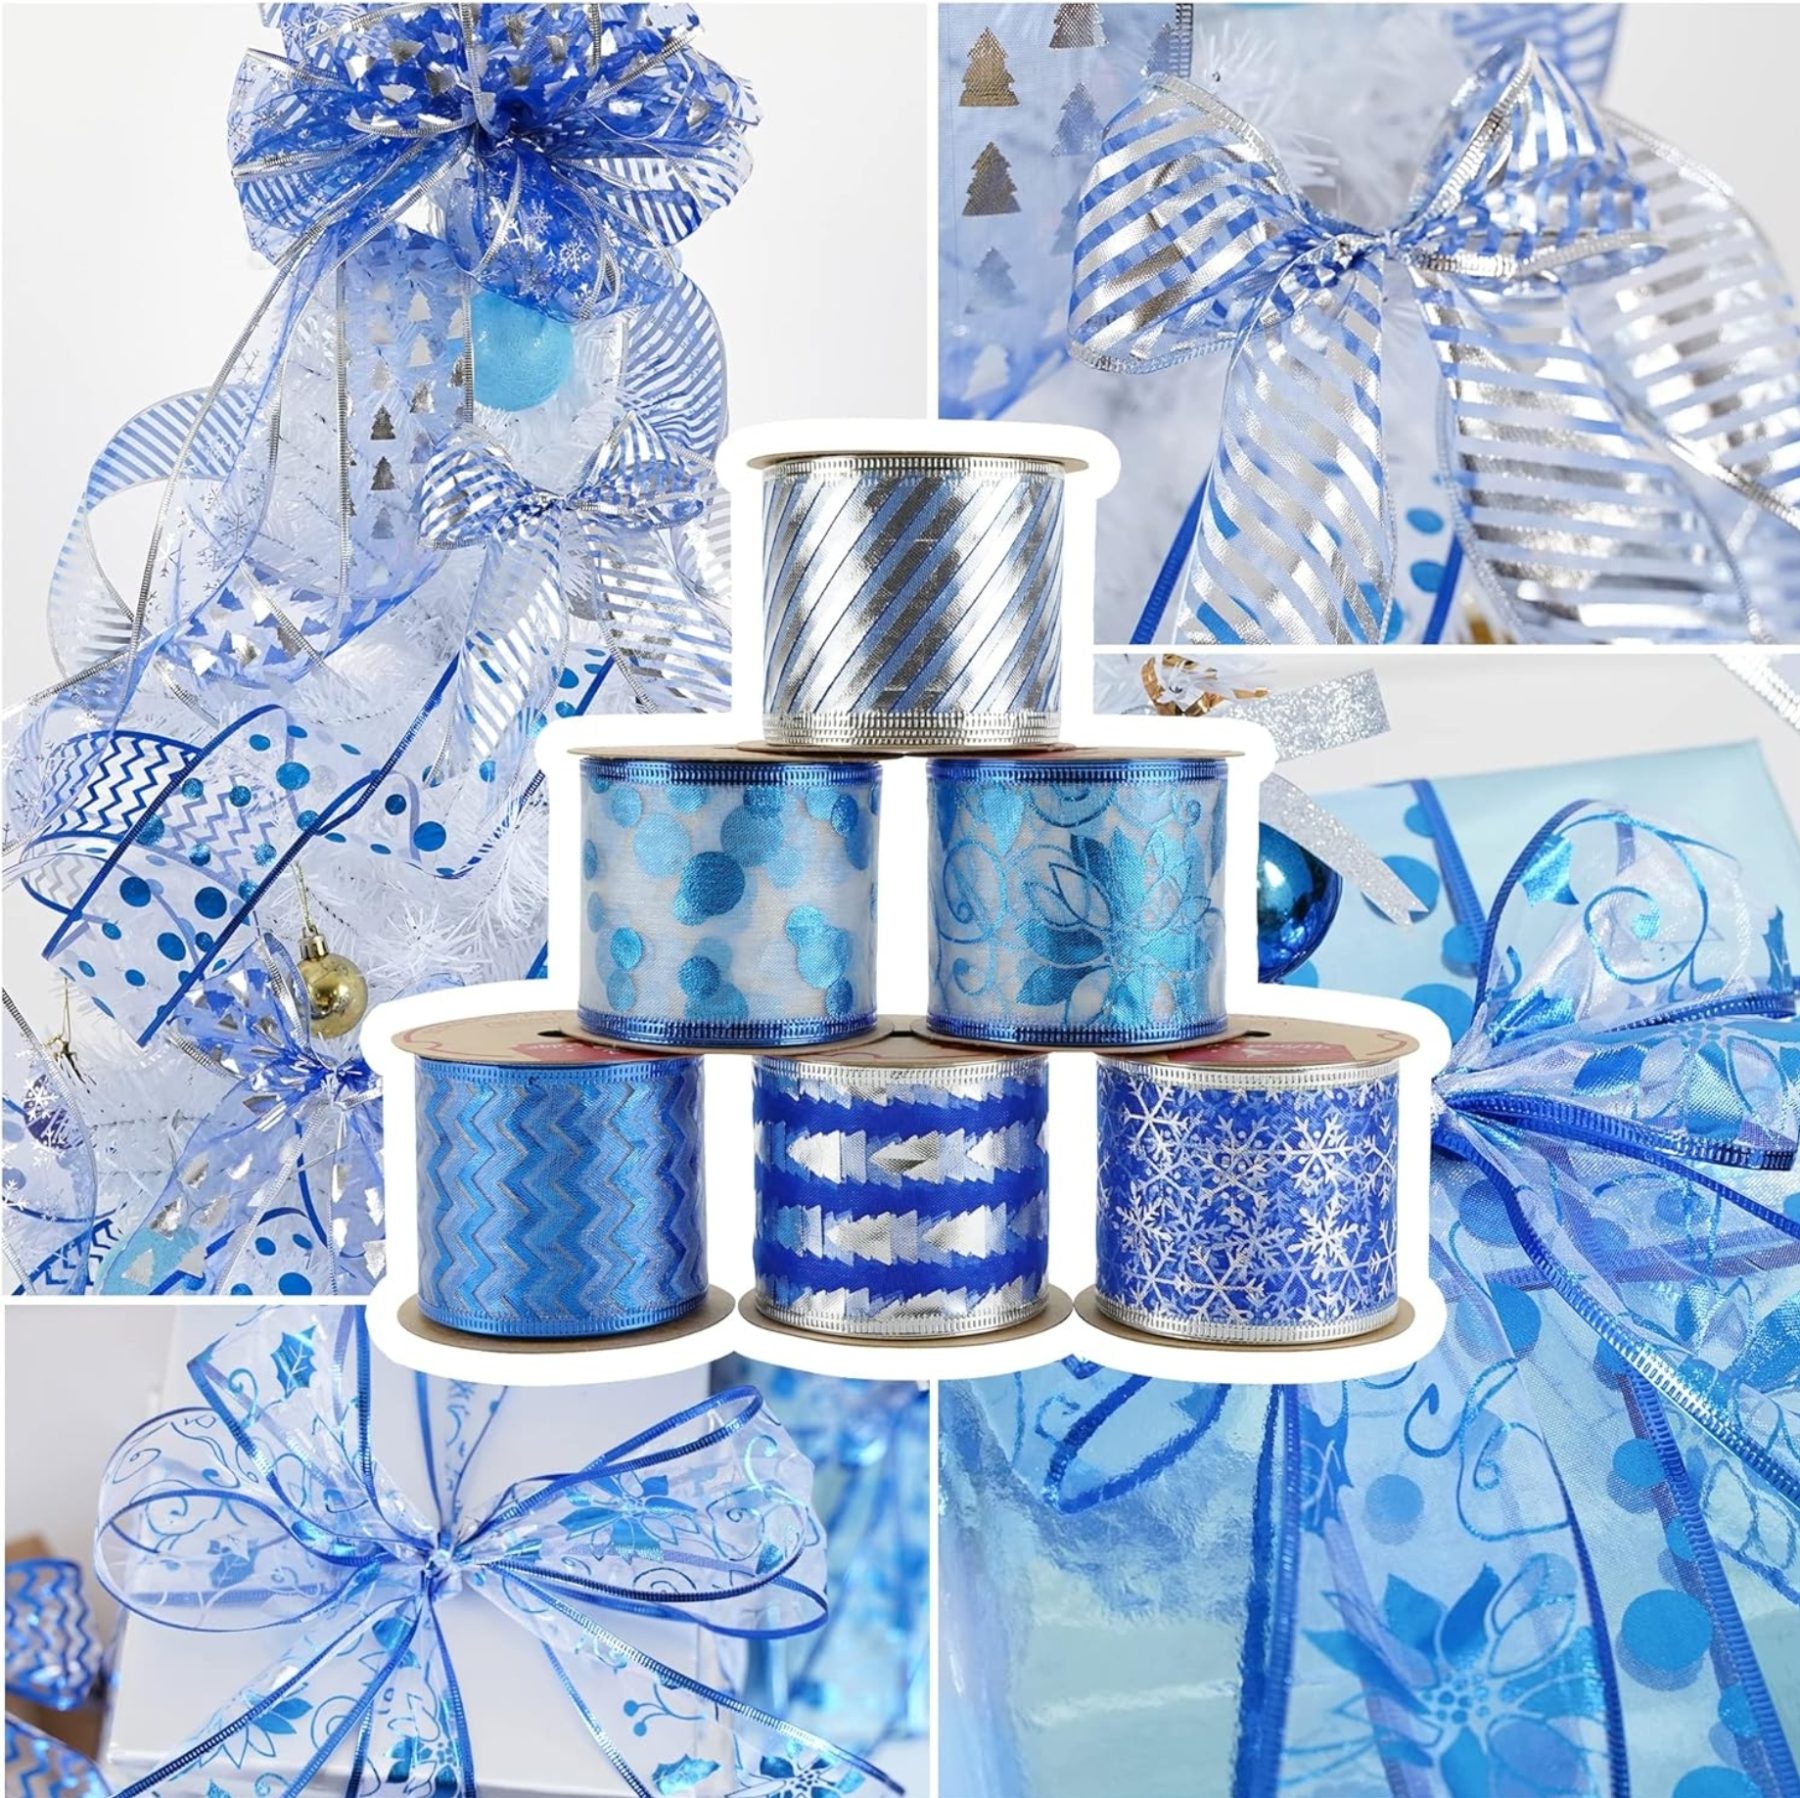 6 Rolls Quality Wired Edge Christmas Ribbon In Shades of Blue and Silver.